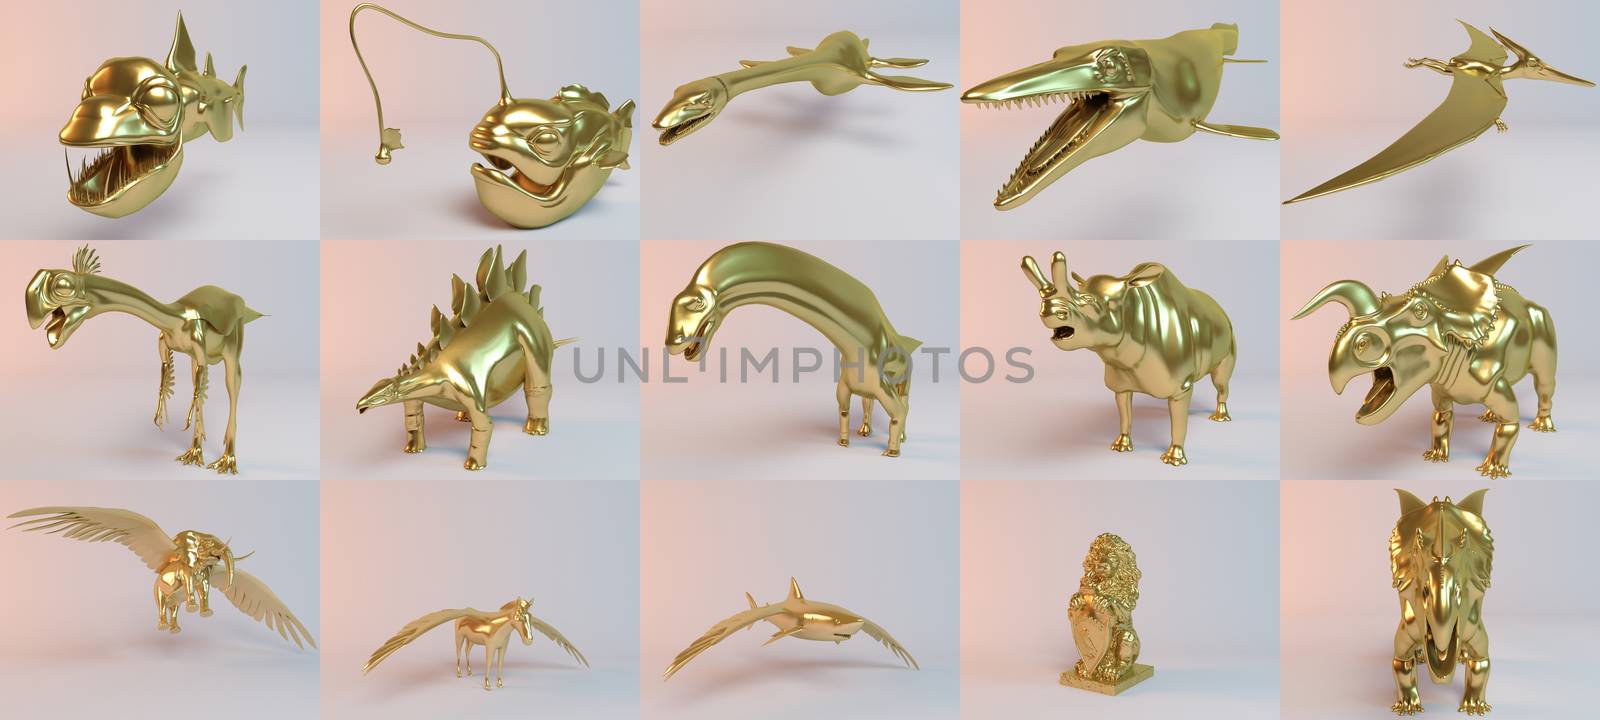 Golden 3D animals collection inside a stage with high render quality to be used as a logo, medal, symbol, shape, emblem, icon, business, geometric, label or any other use